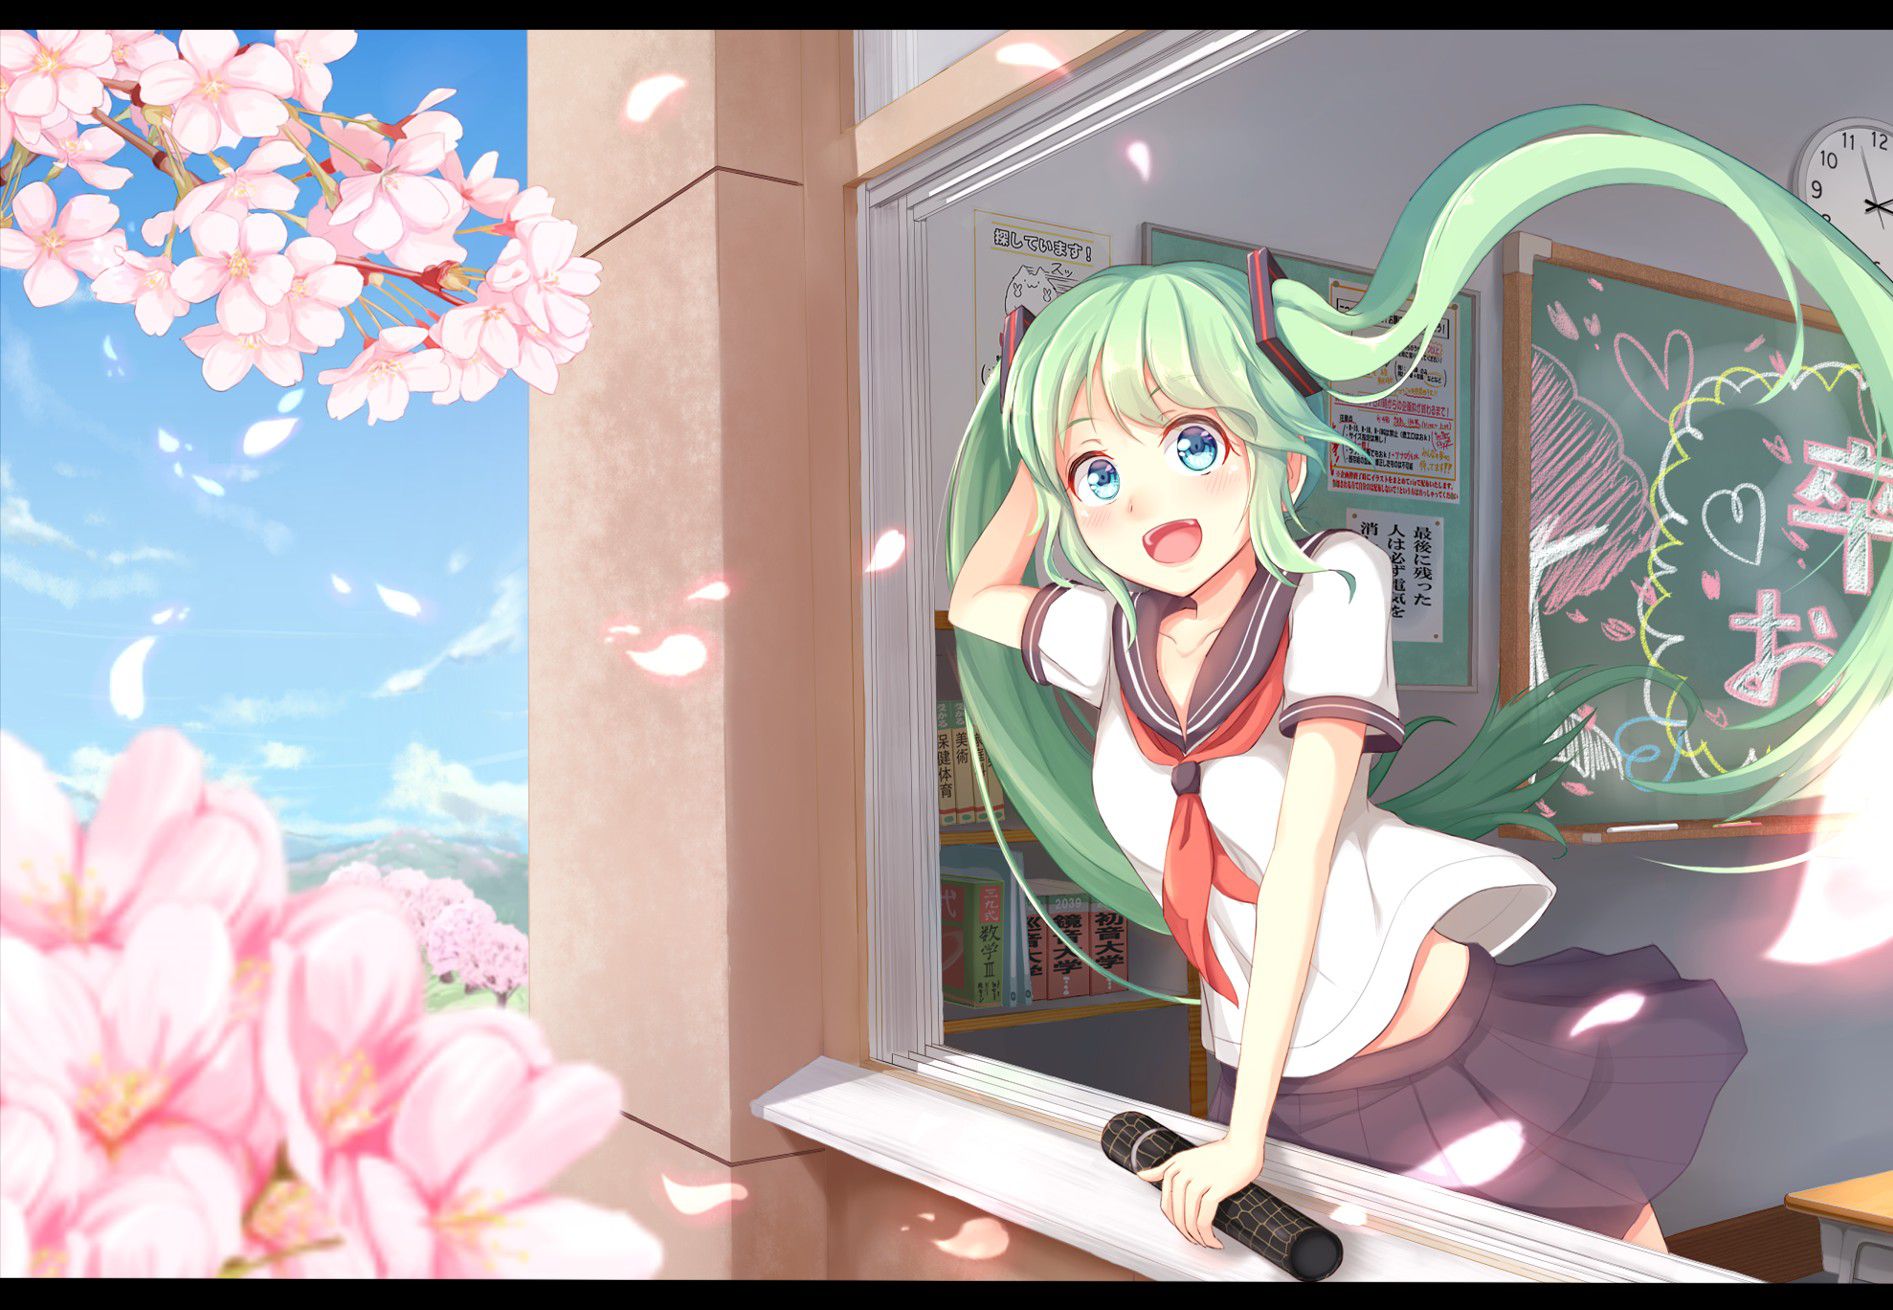 [Secondary] [VOCALOID] want to see images of miku dressed in school uniform! 3 21